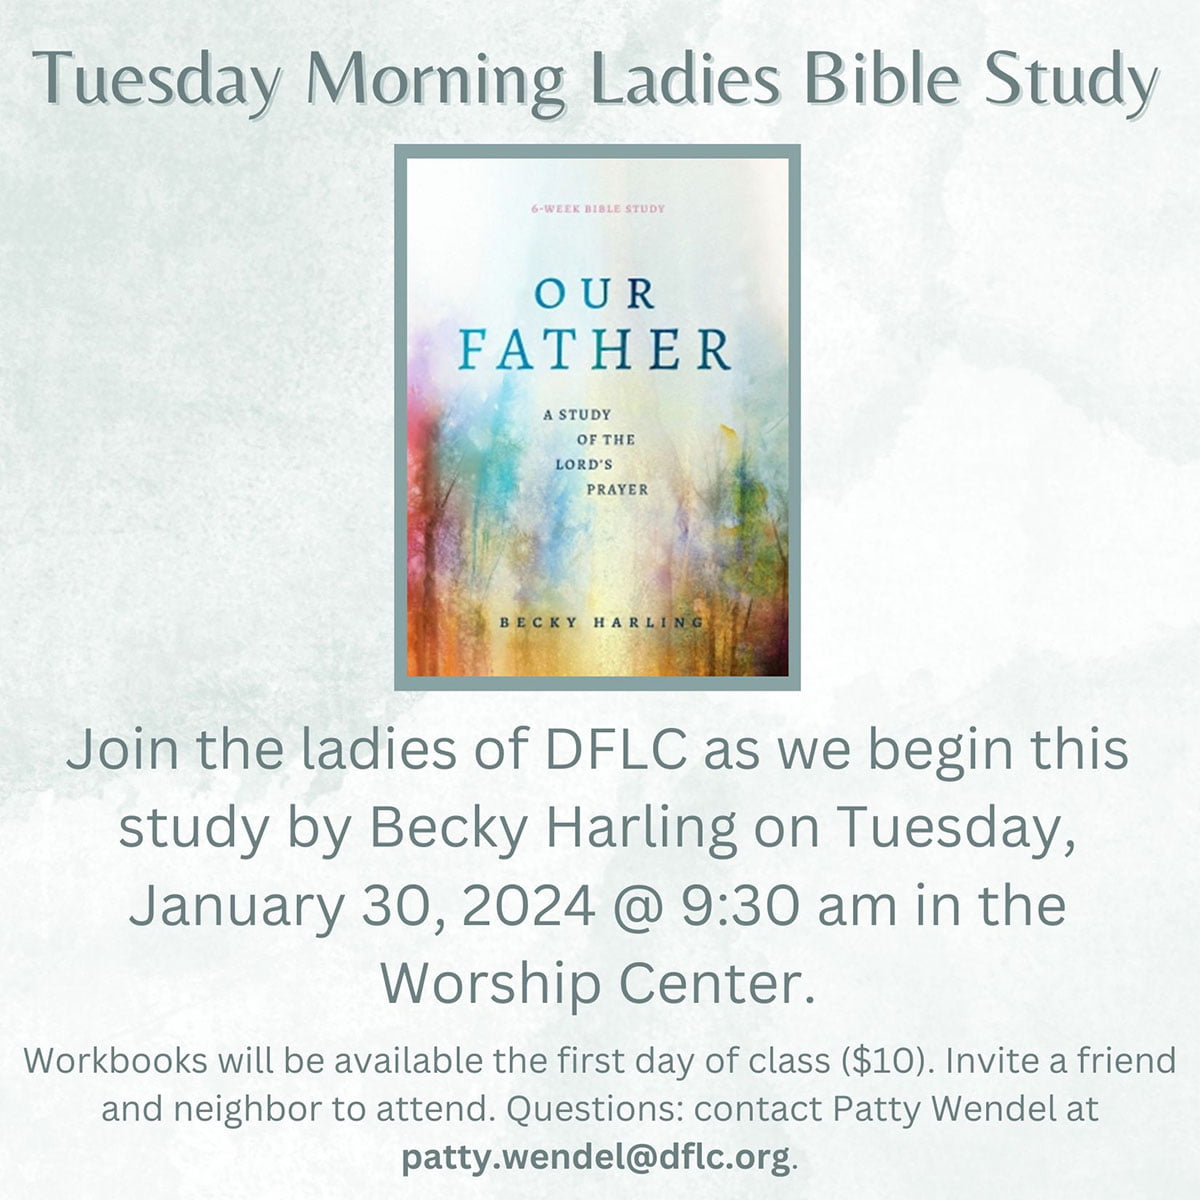 Tuesday Morning Ladies Bible Study flyer